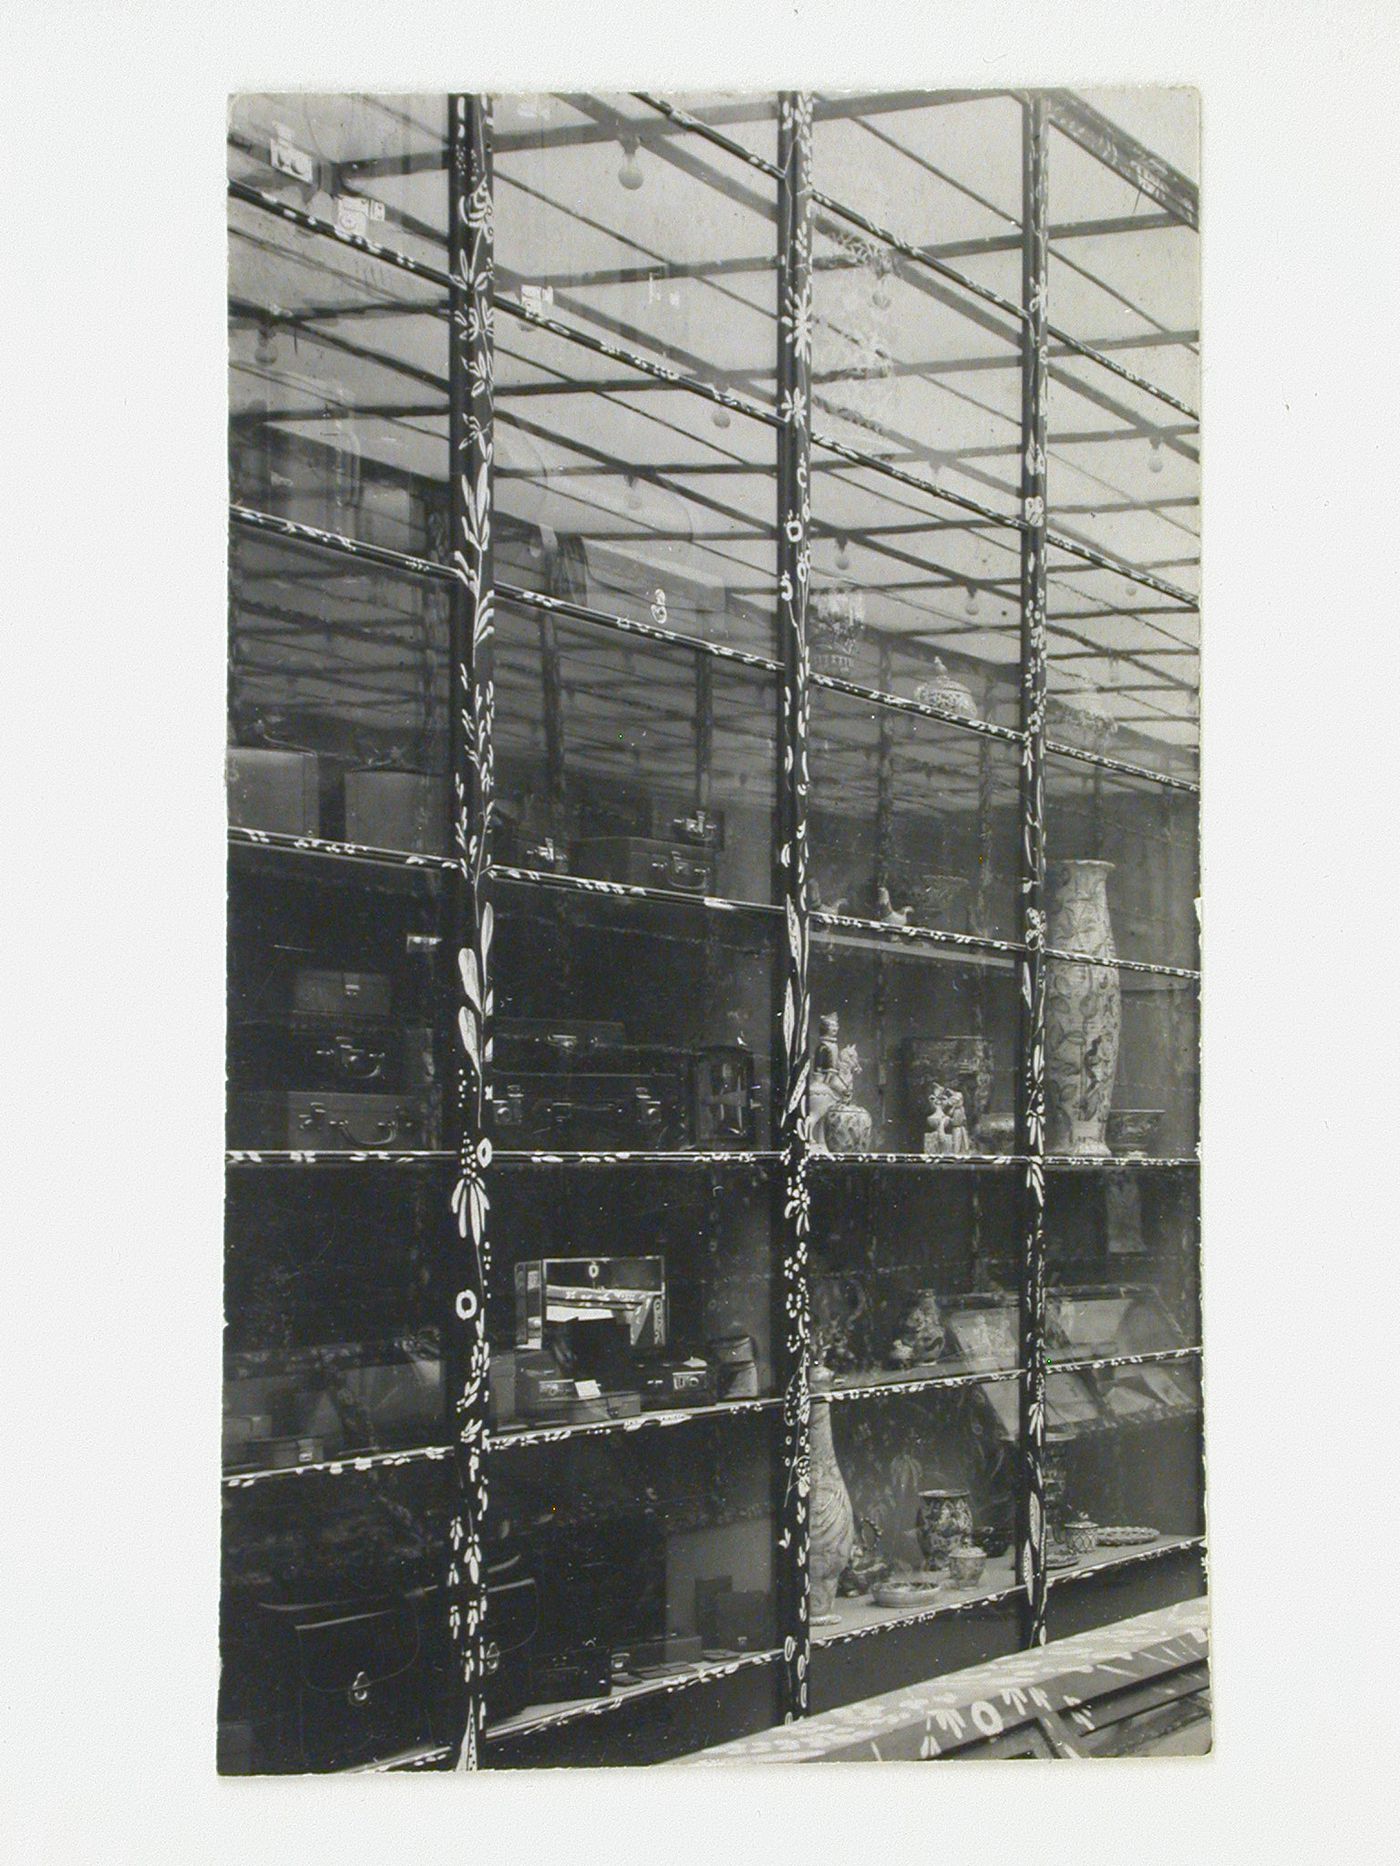 Interior view of a wall of exhibit cases in the Main Exhibition Hall of the Austrian Pavilion, International Exhibition of Modern Decorative and Industrial Arts [Exposition internationale des arts décoratifs et industriels modernes], Paris, France